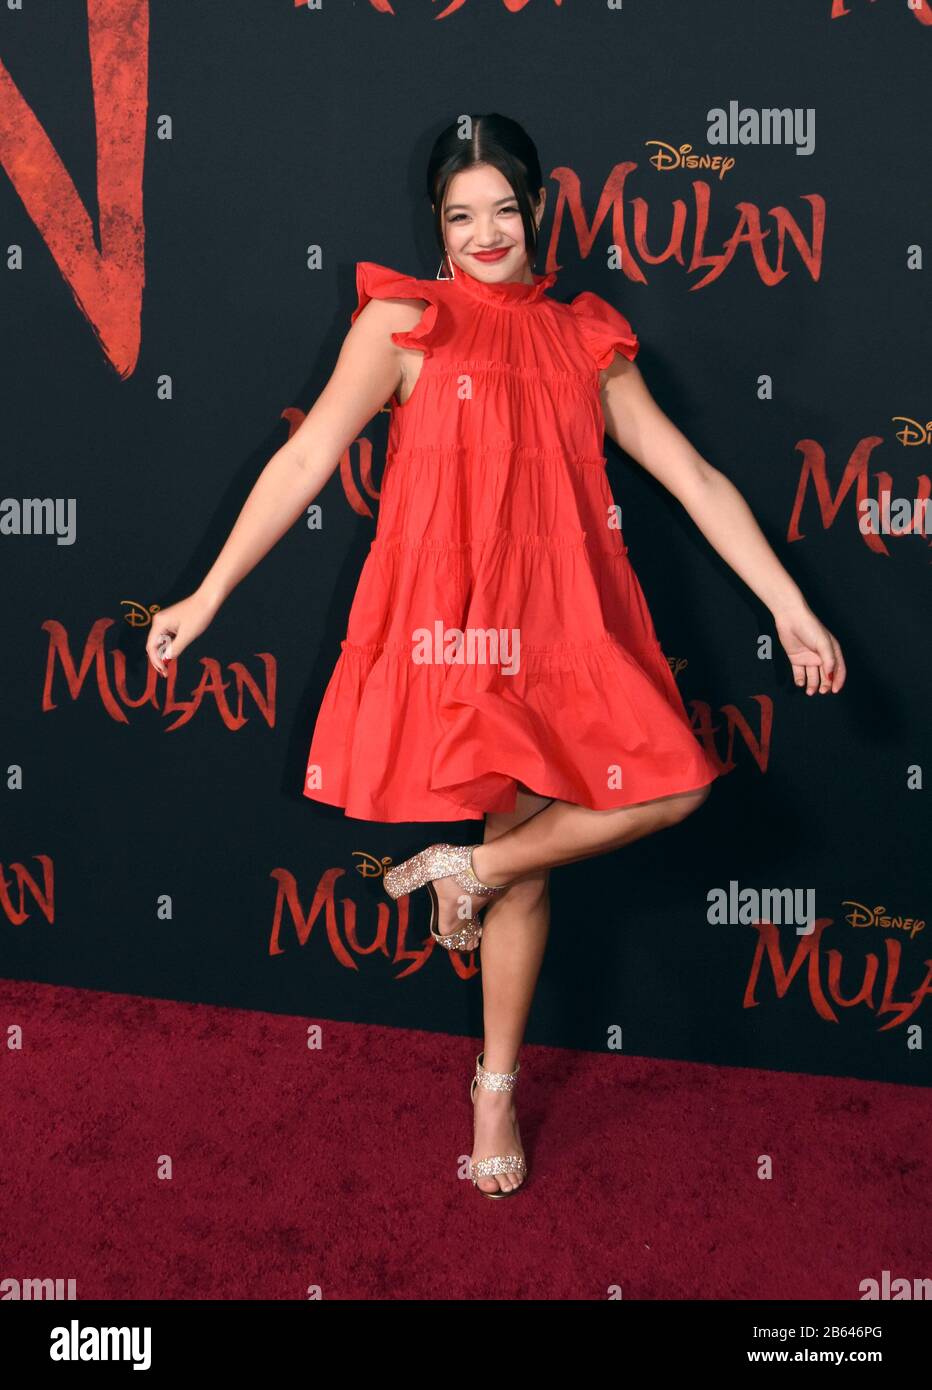 Hollywood, California, USA 9th March 2020 Actress Peyton Elizabeth Lee attends the World Premiere of Disney's  'Mulan' on March 9, 2020 at the Dolby Theatre in Hollywood, California, USA. Photo by Barry King/Alamy Live News Stock Photo